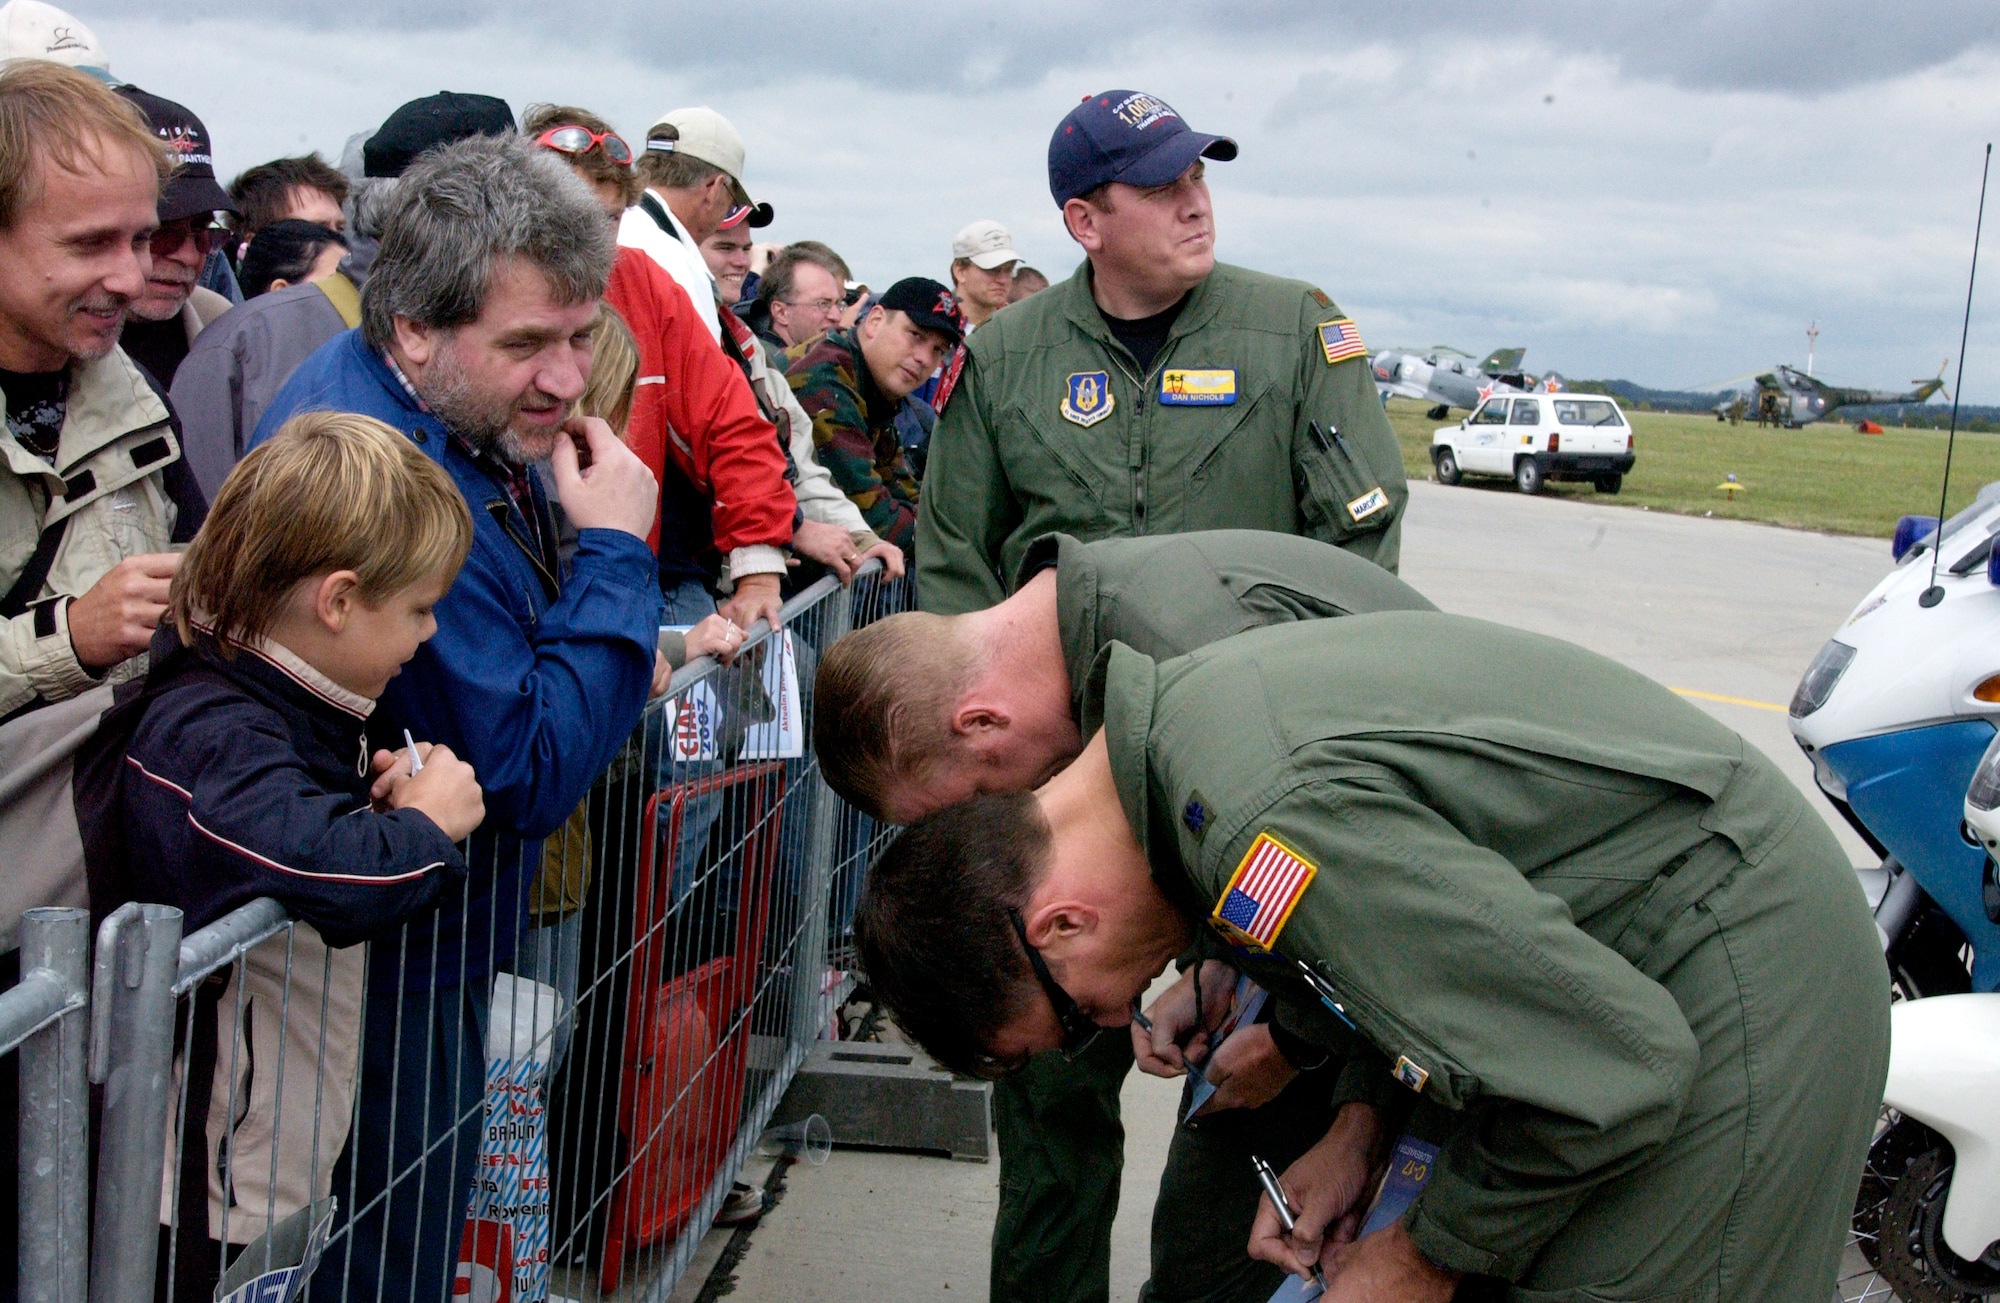 Pilots from Spirit of California from March Air Reserve Base, Calif., sign autographs at the Brno International Air Festival in the Czech Republic. The crew, from the 729th Airlift Squadron, had just completed an aerial demonstration at the air show. (U.S. Air Force photo by Senior Airman David Flaherty)